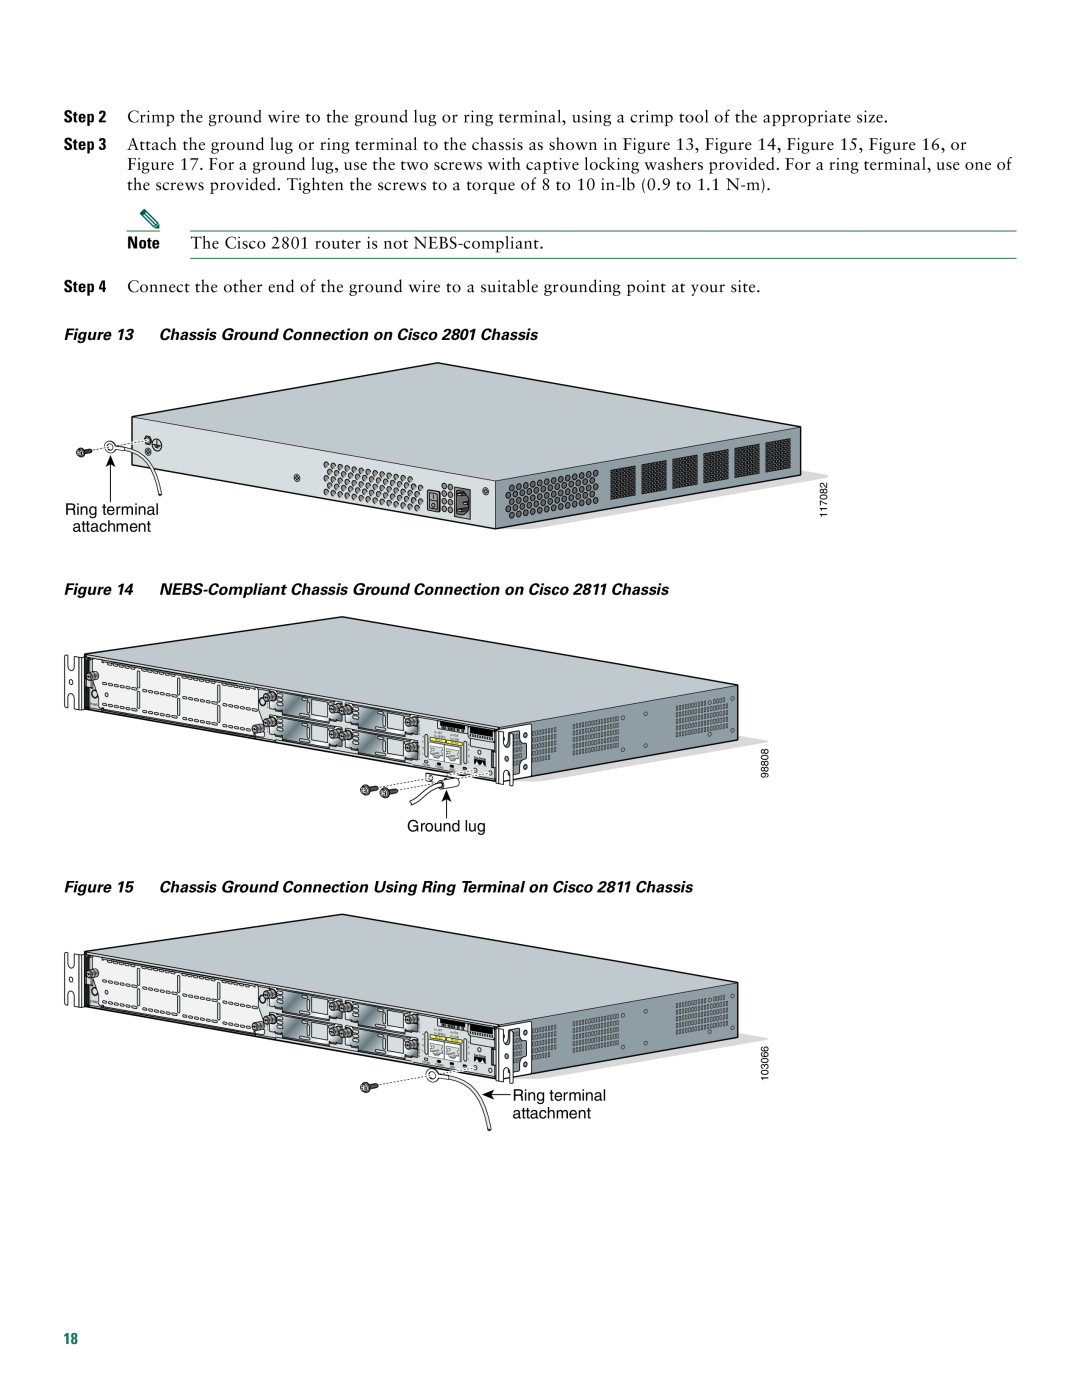 Cisco Systems 2800 manual Note The Cisco 2801 router is not NEBS-compliant 